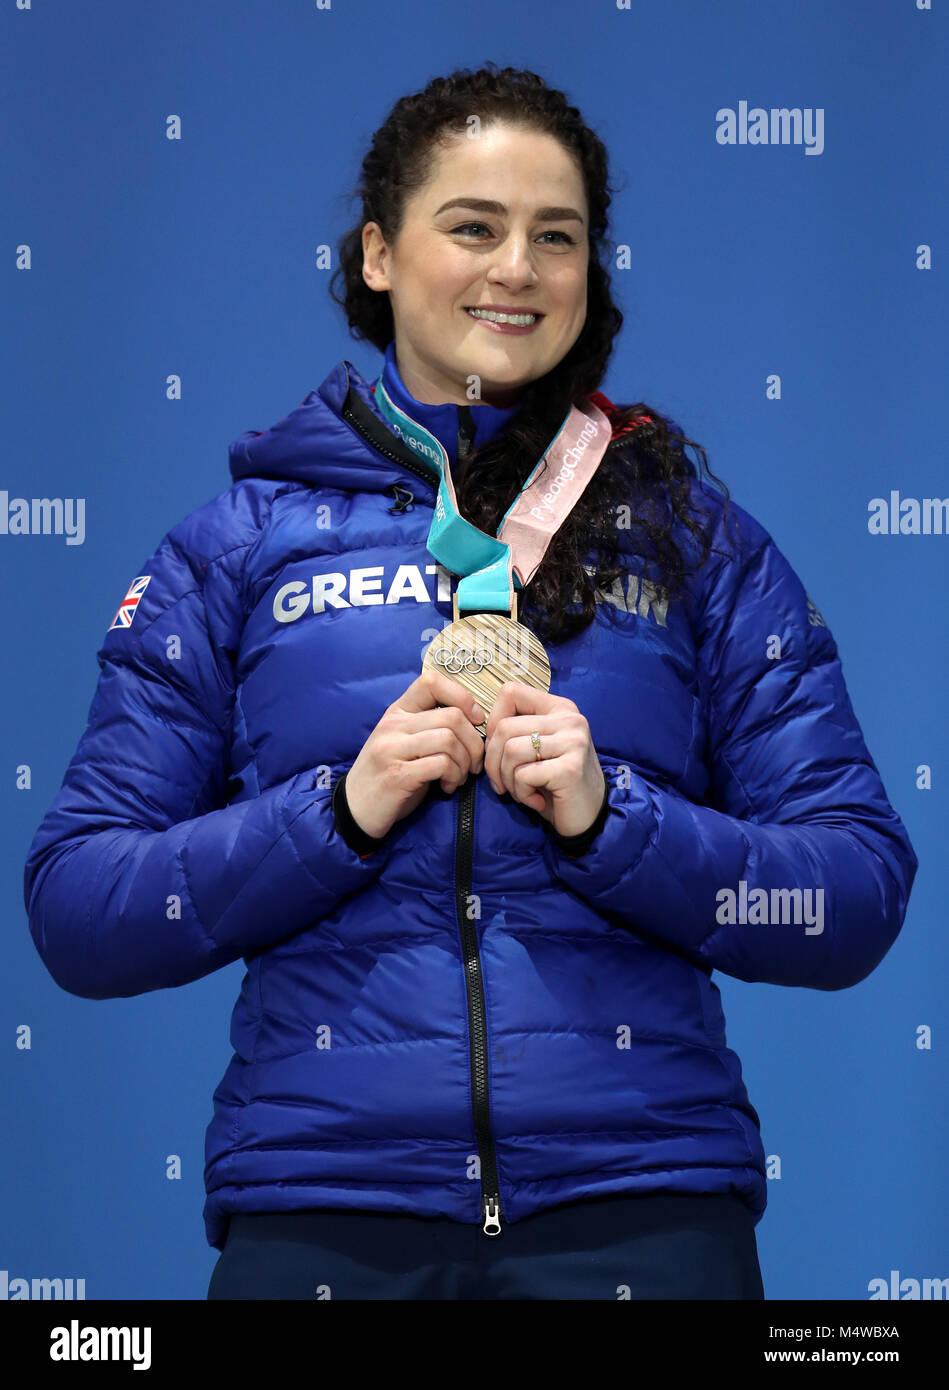 Great Britain's Laura Deas poses with her bronze medal during the medal ceremony for the Women's Skeleton on day nine of the PyeongChang 2018 Winter Olympic Games in South Korea. Stock Photo